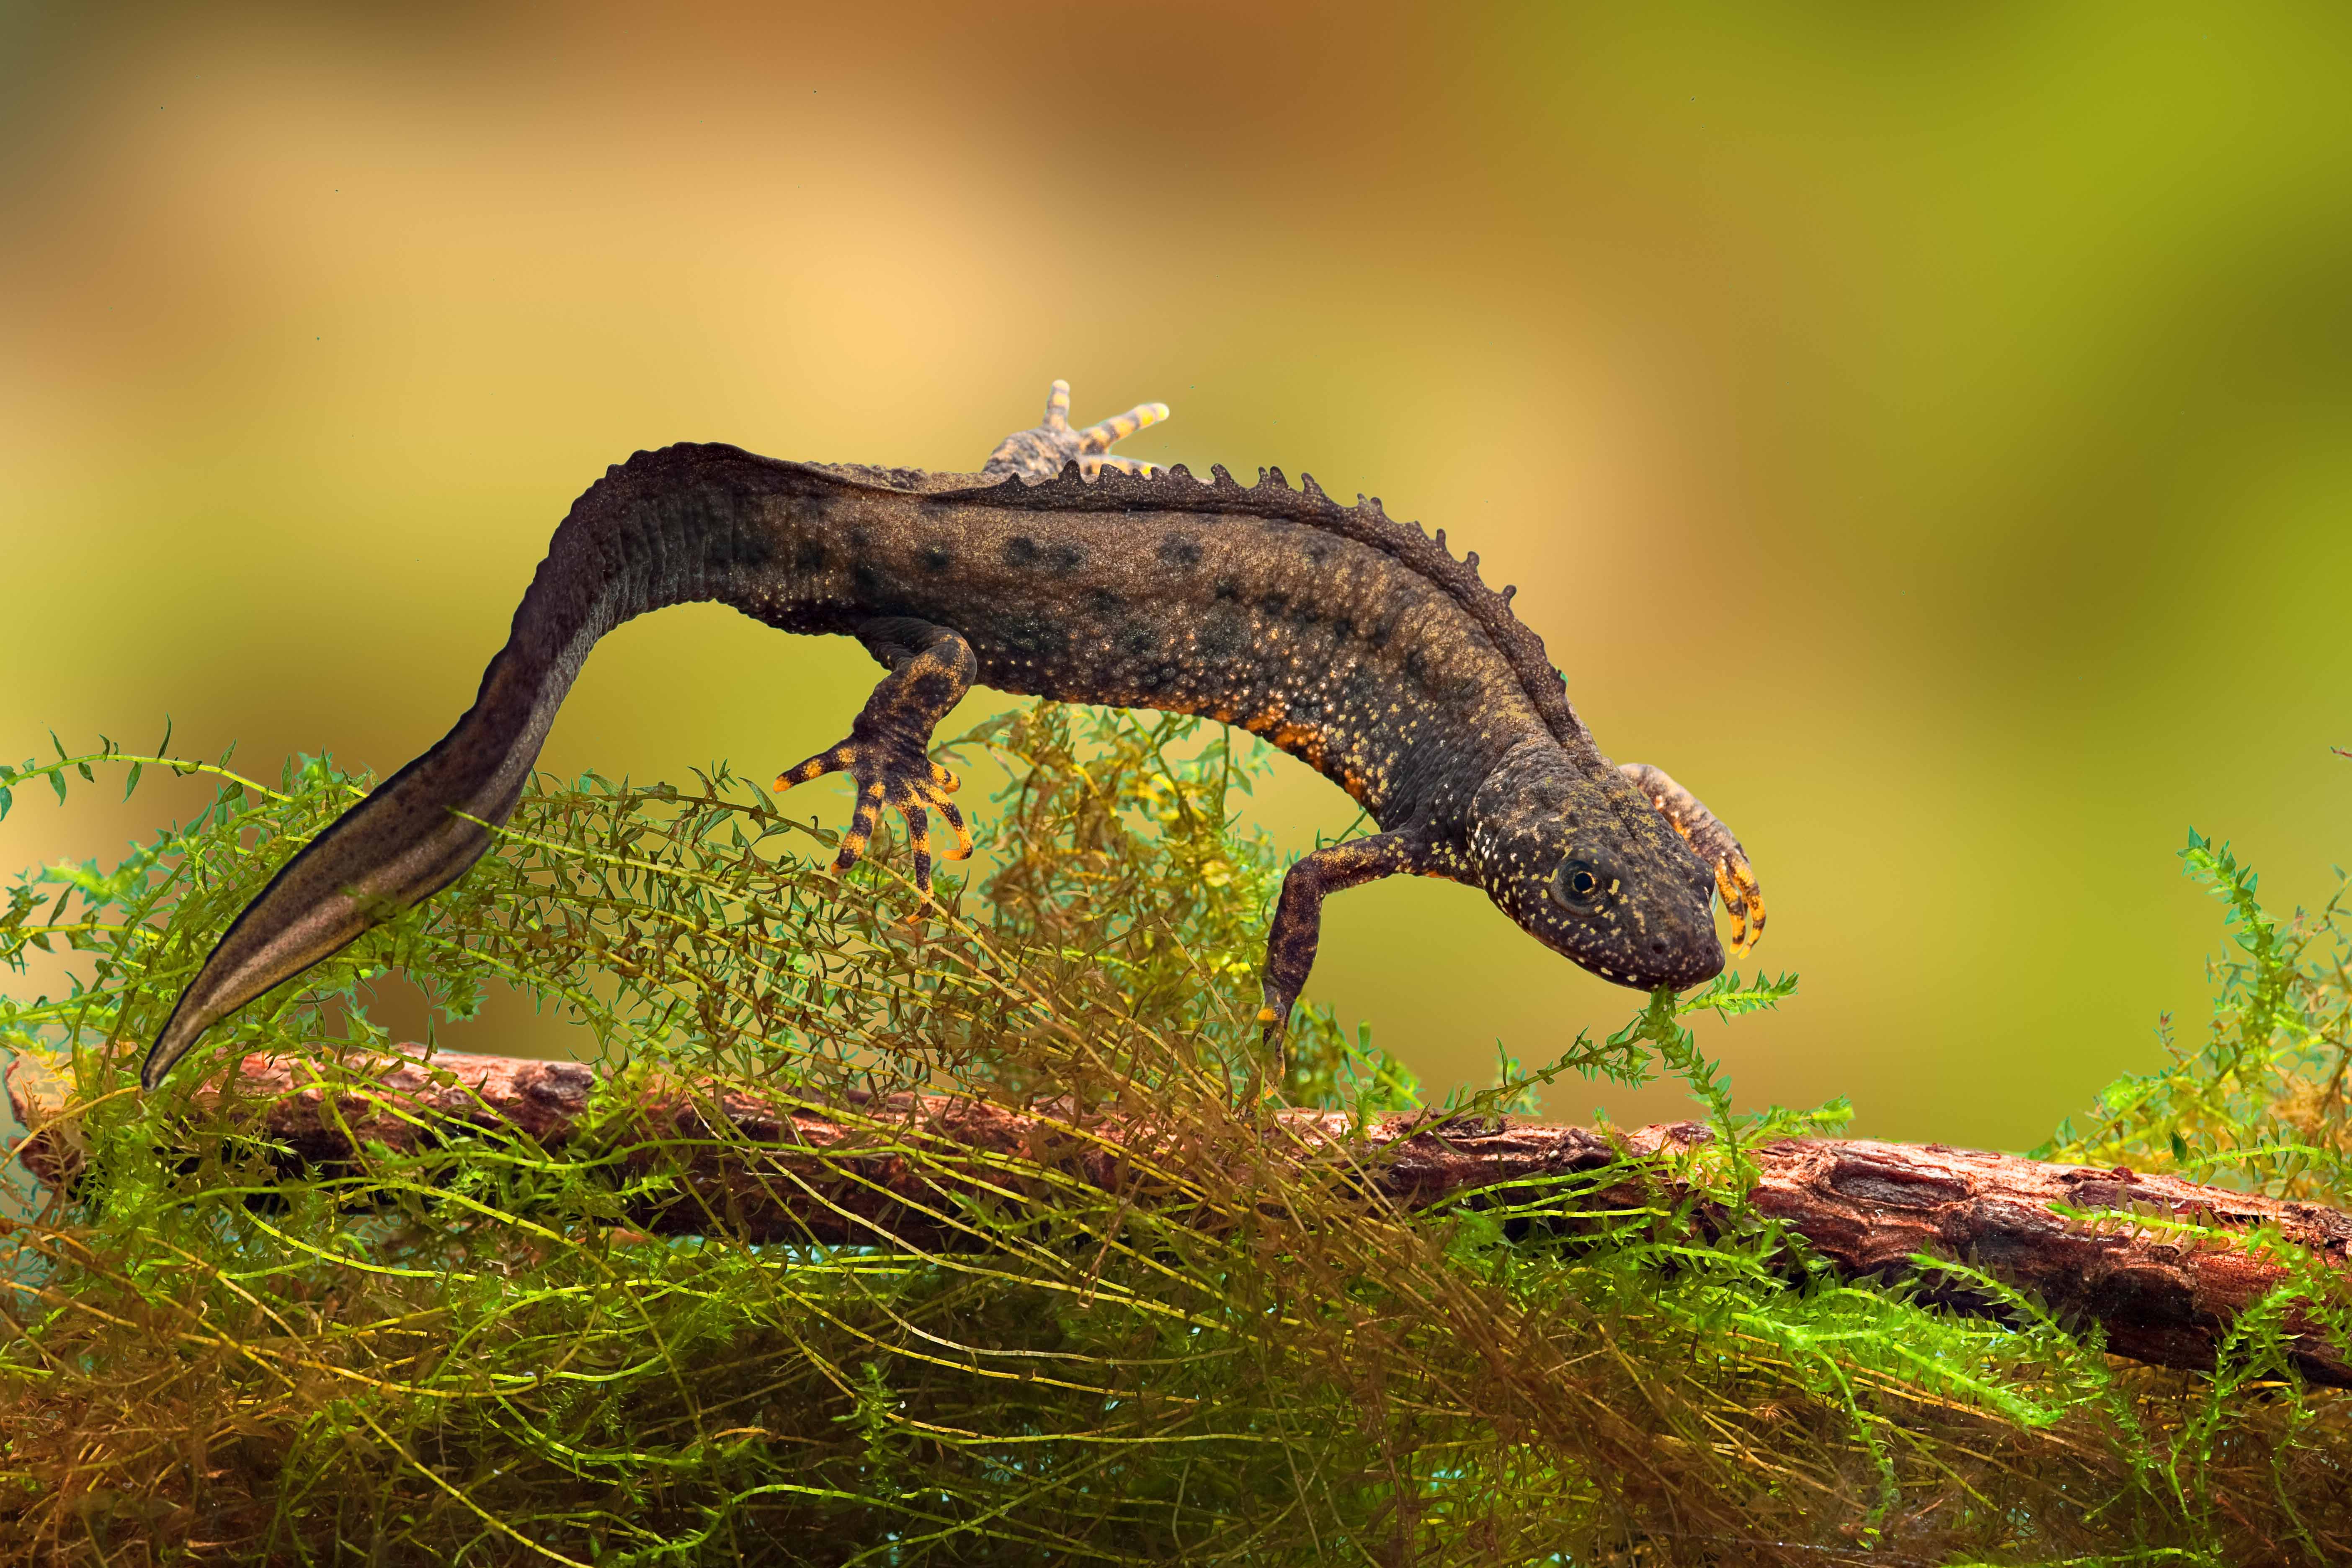 Great Crested Newts